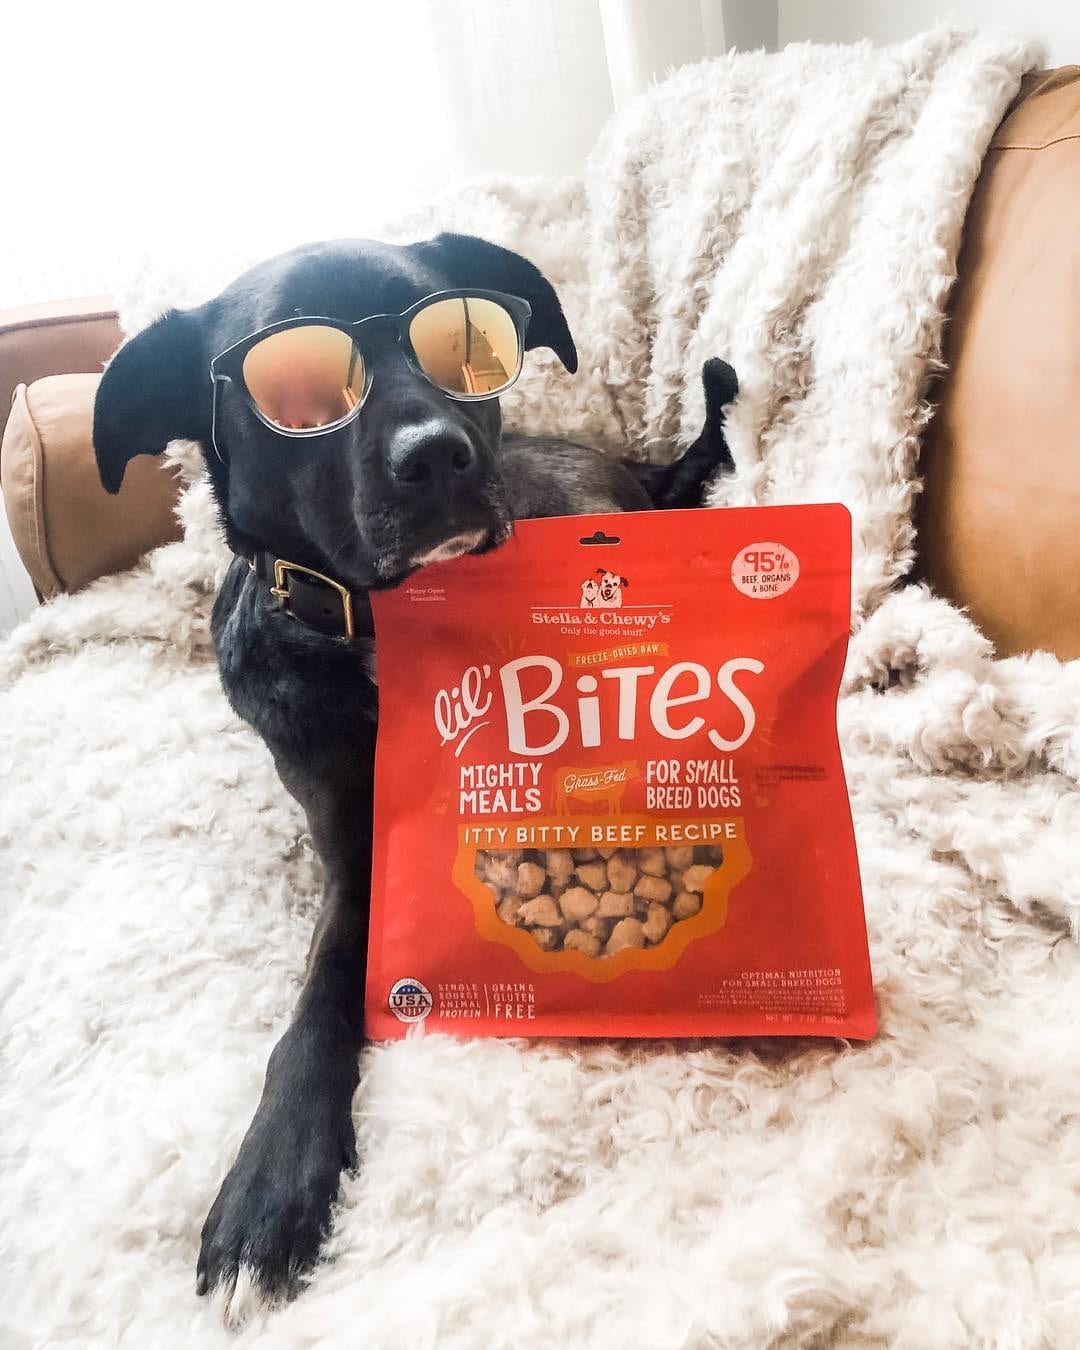 Stella & Chewy’s Lil’ Bites Freeze-Dried Raw Meals for Small Breed Dogs, Itty Bitty Beef Recipe